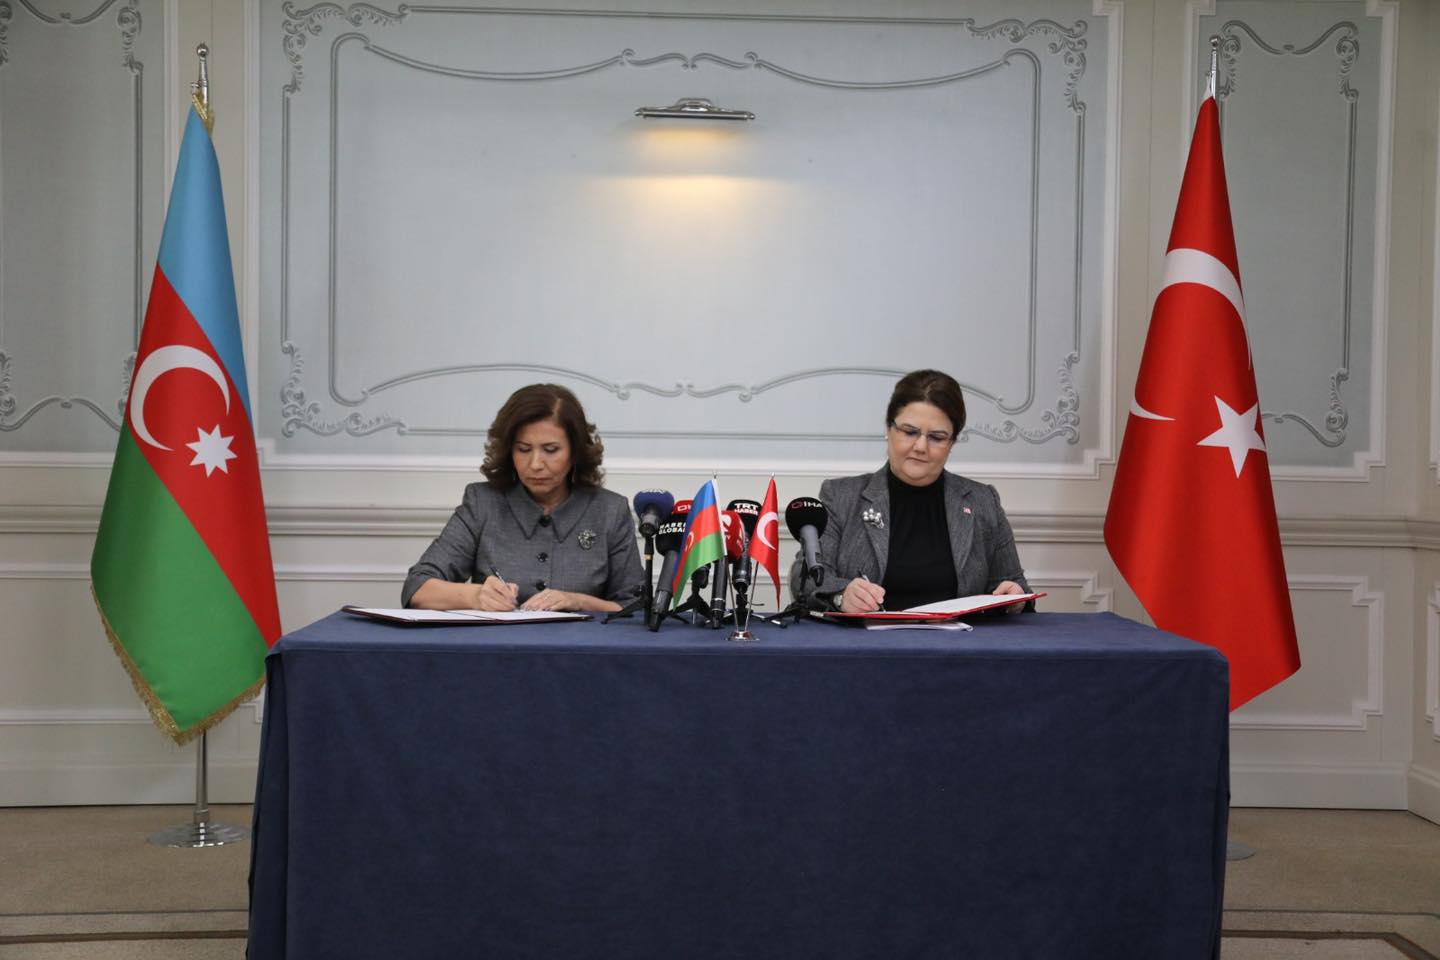 An Action Plan was signed between Turkey and Azerbaijan in the field of cooperation on family, women and children issues